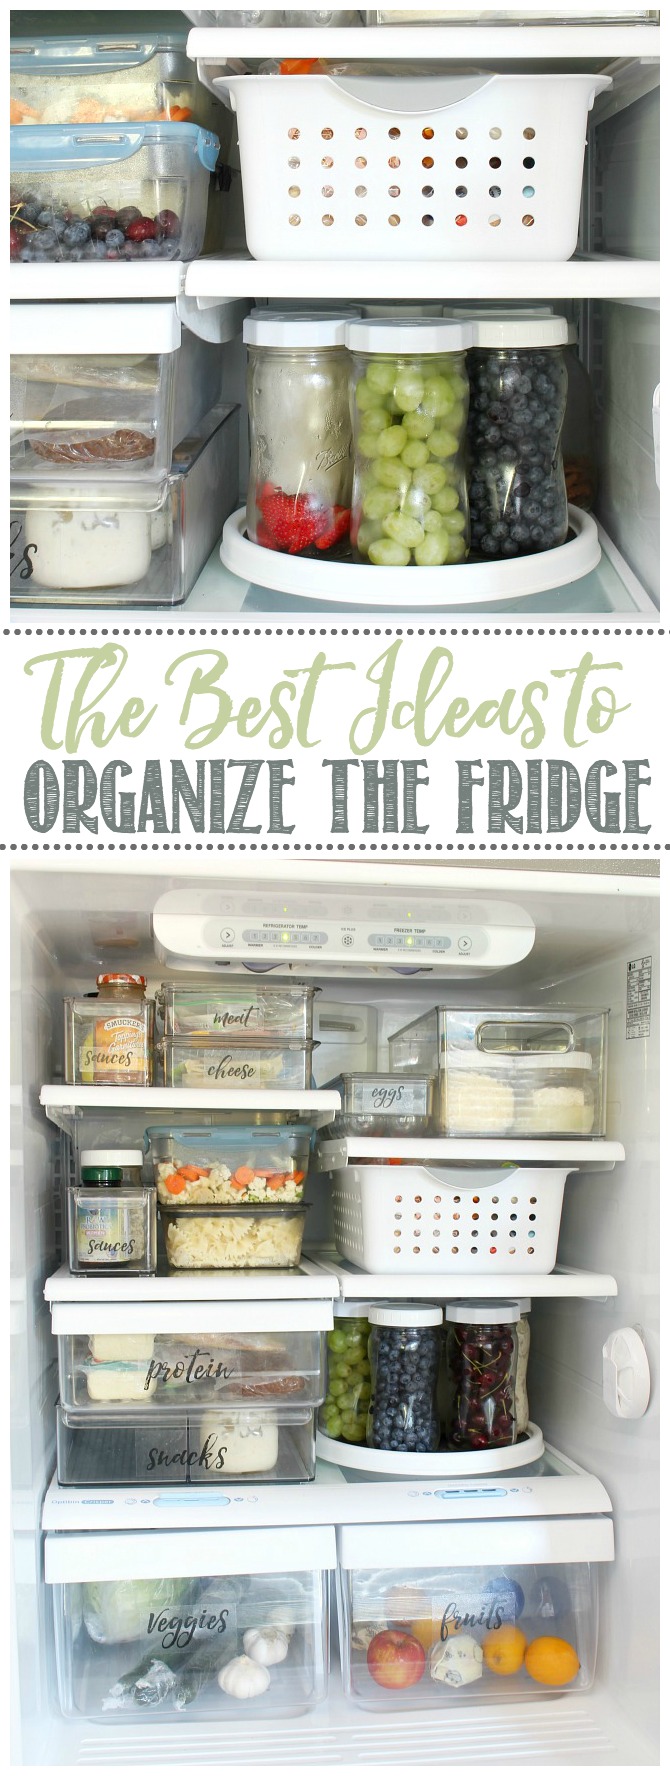 Refrigerator Organization Ideas for Better Function and Storage